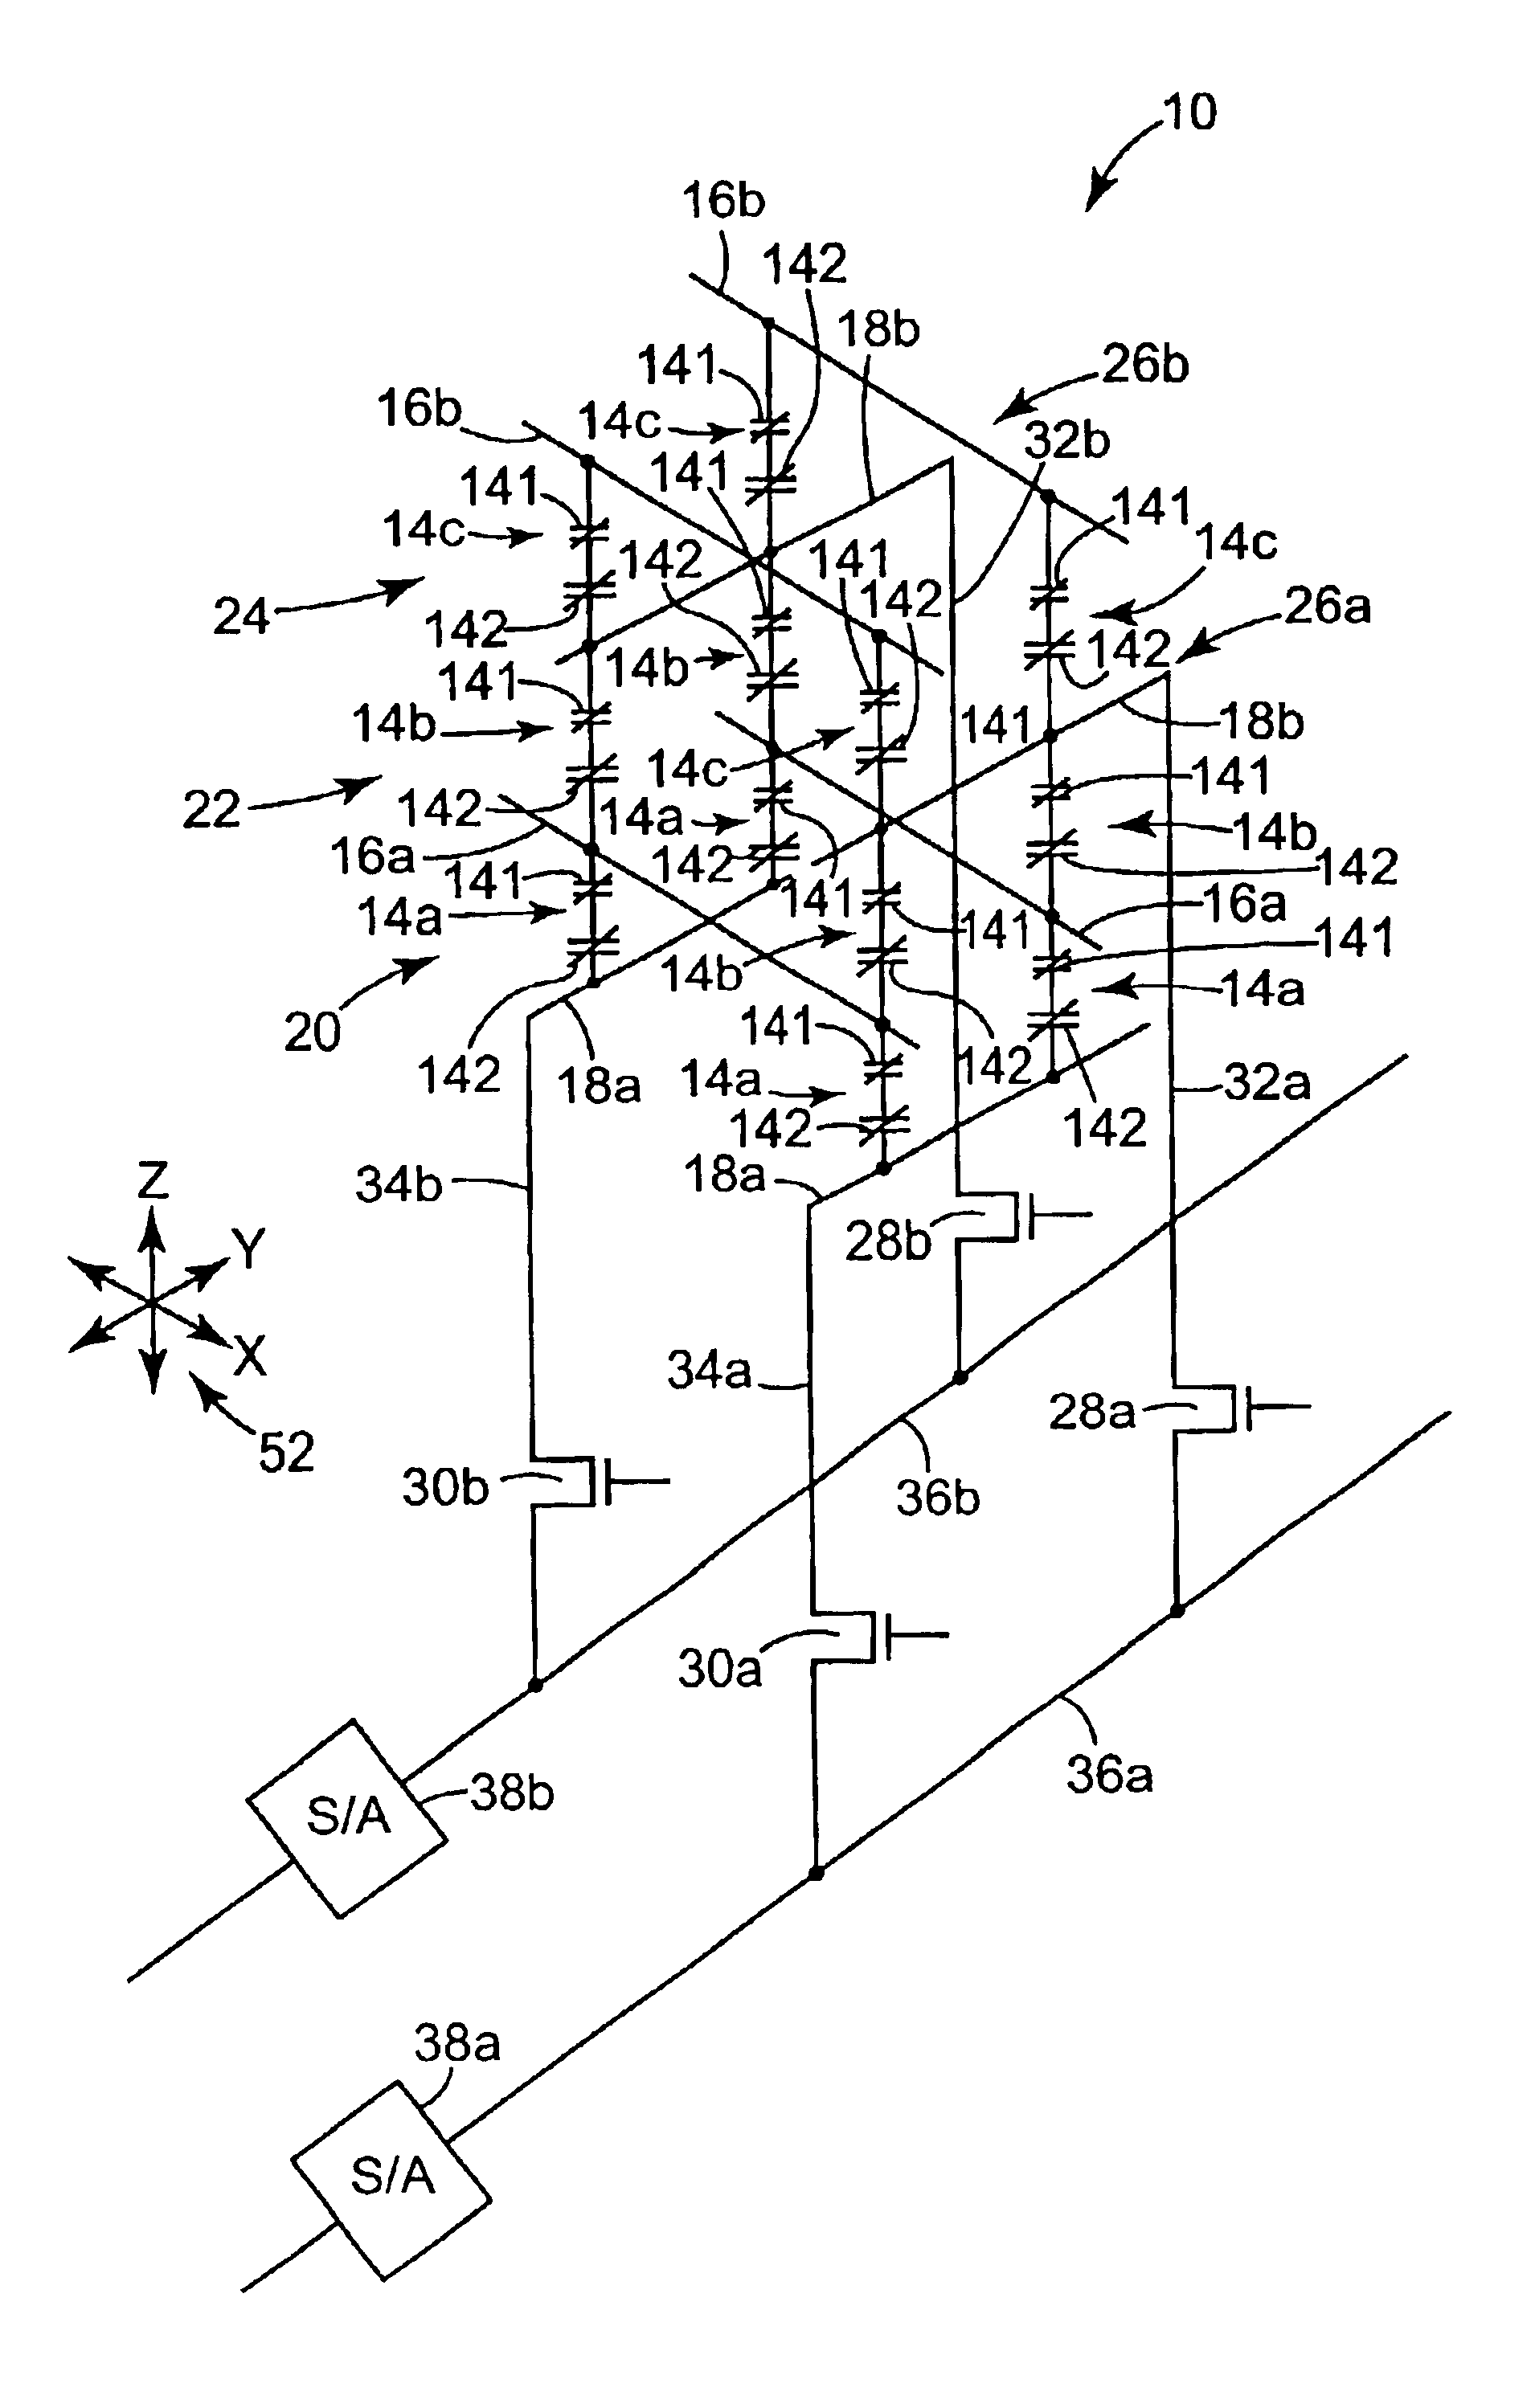 Memory storage device with segmented column line array